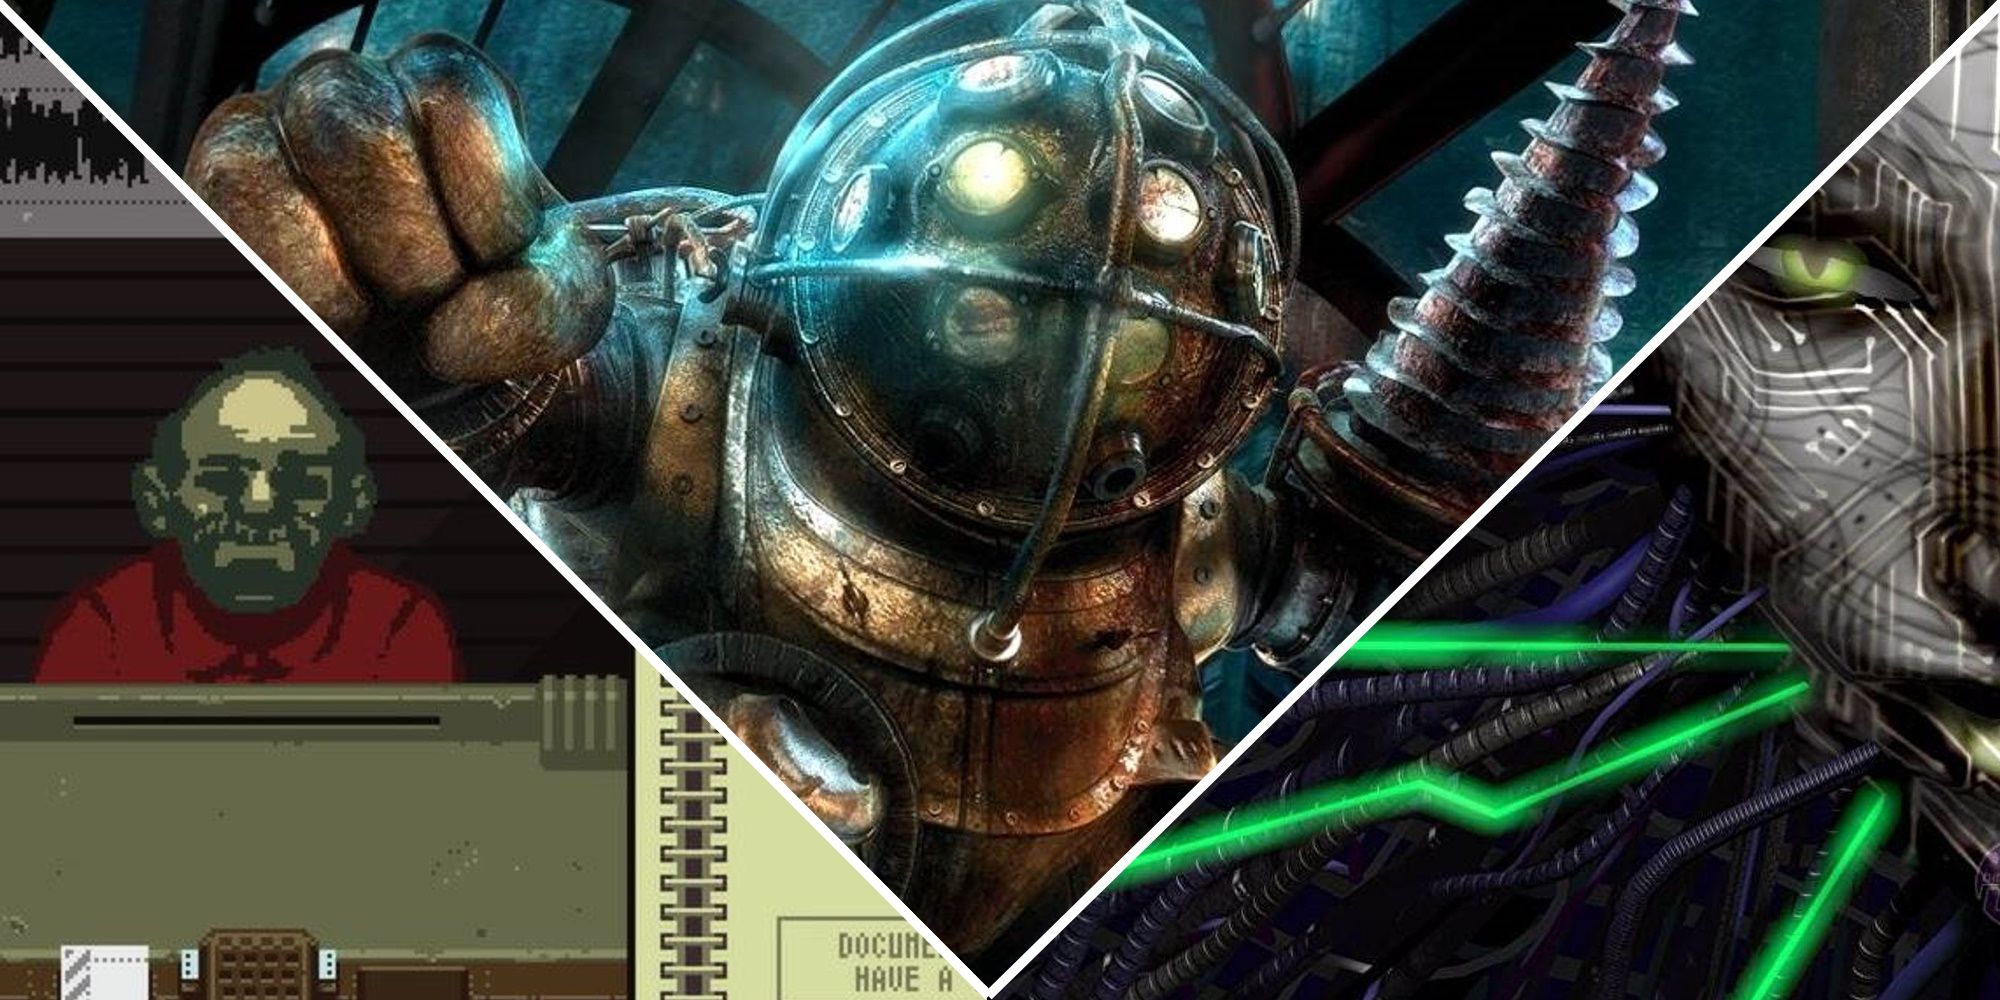 Papers Please, Bioshock, and System Shock 2